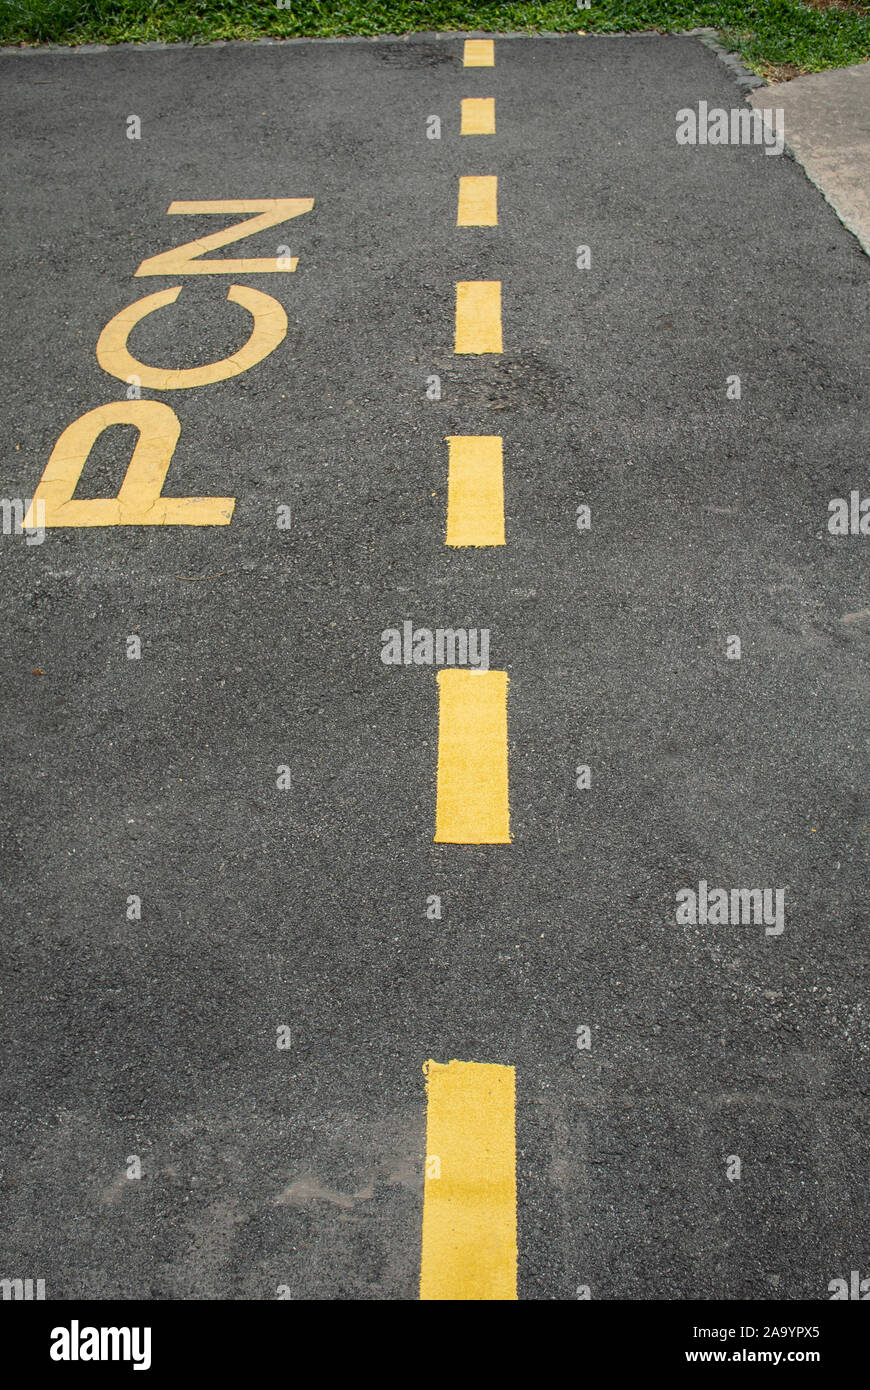 Yellow 'PCN' sign and lines on asphalt road Stock Photo